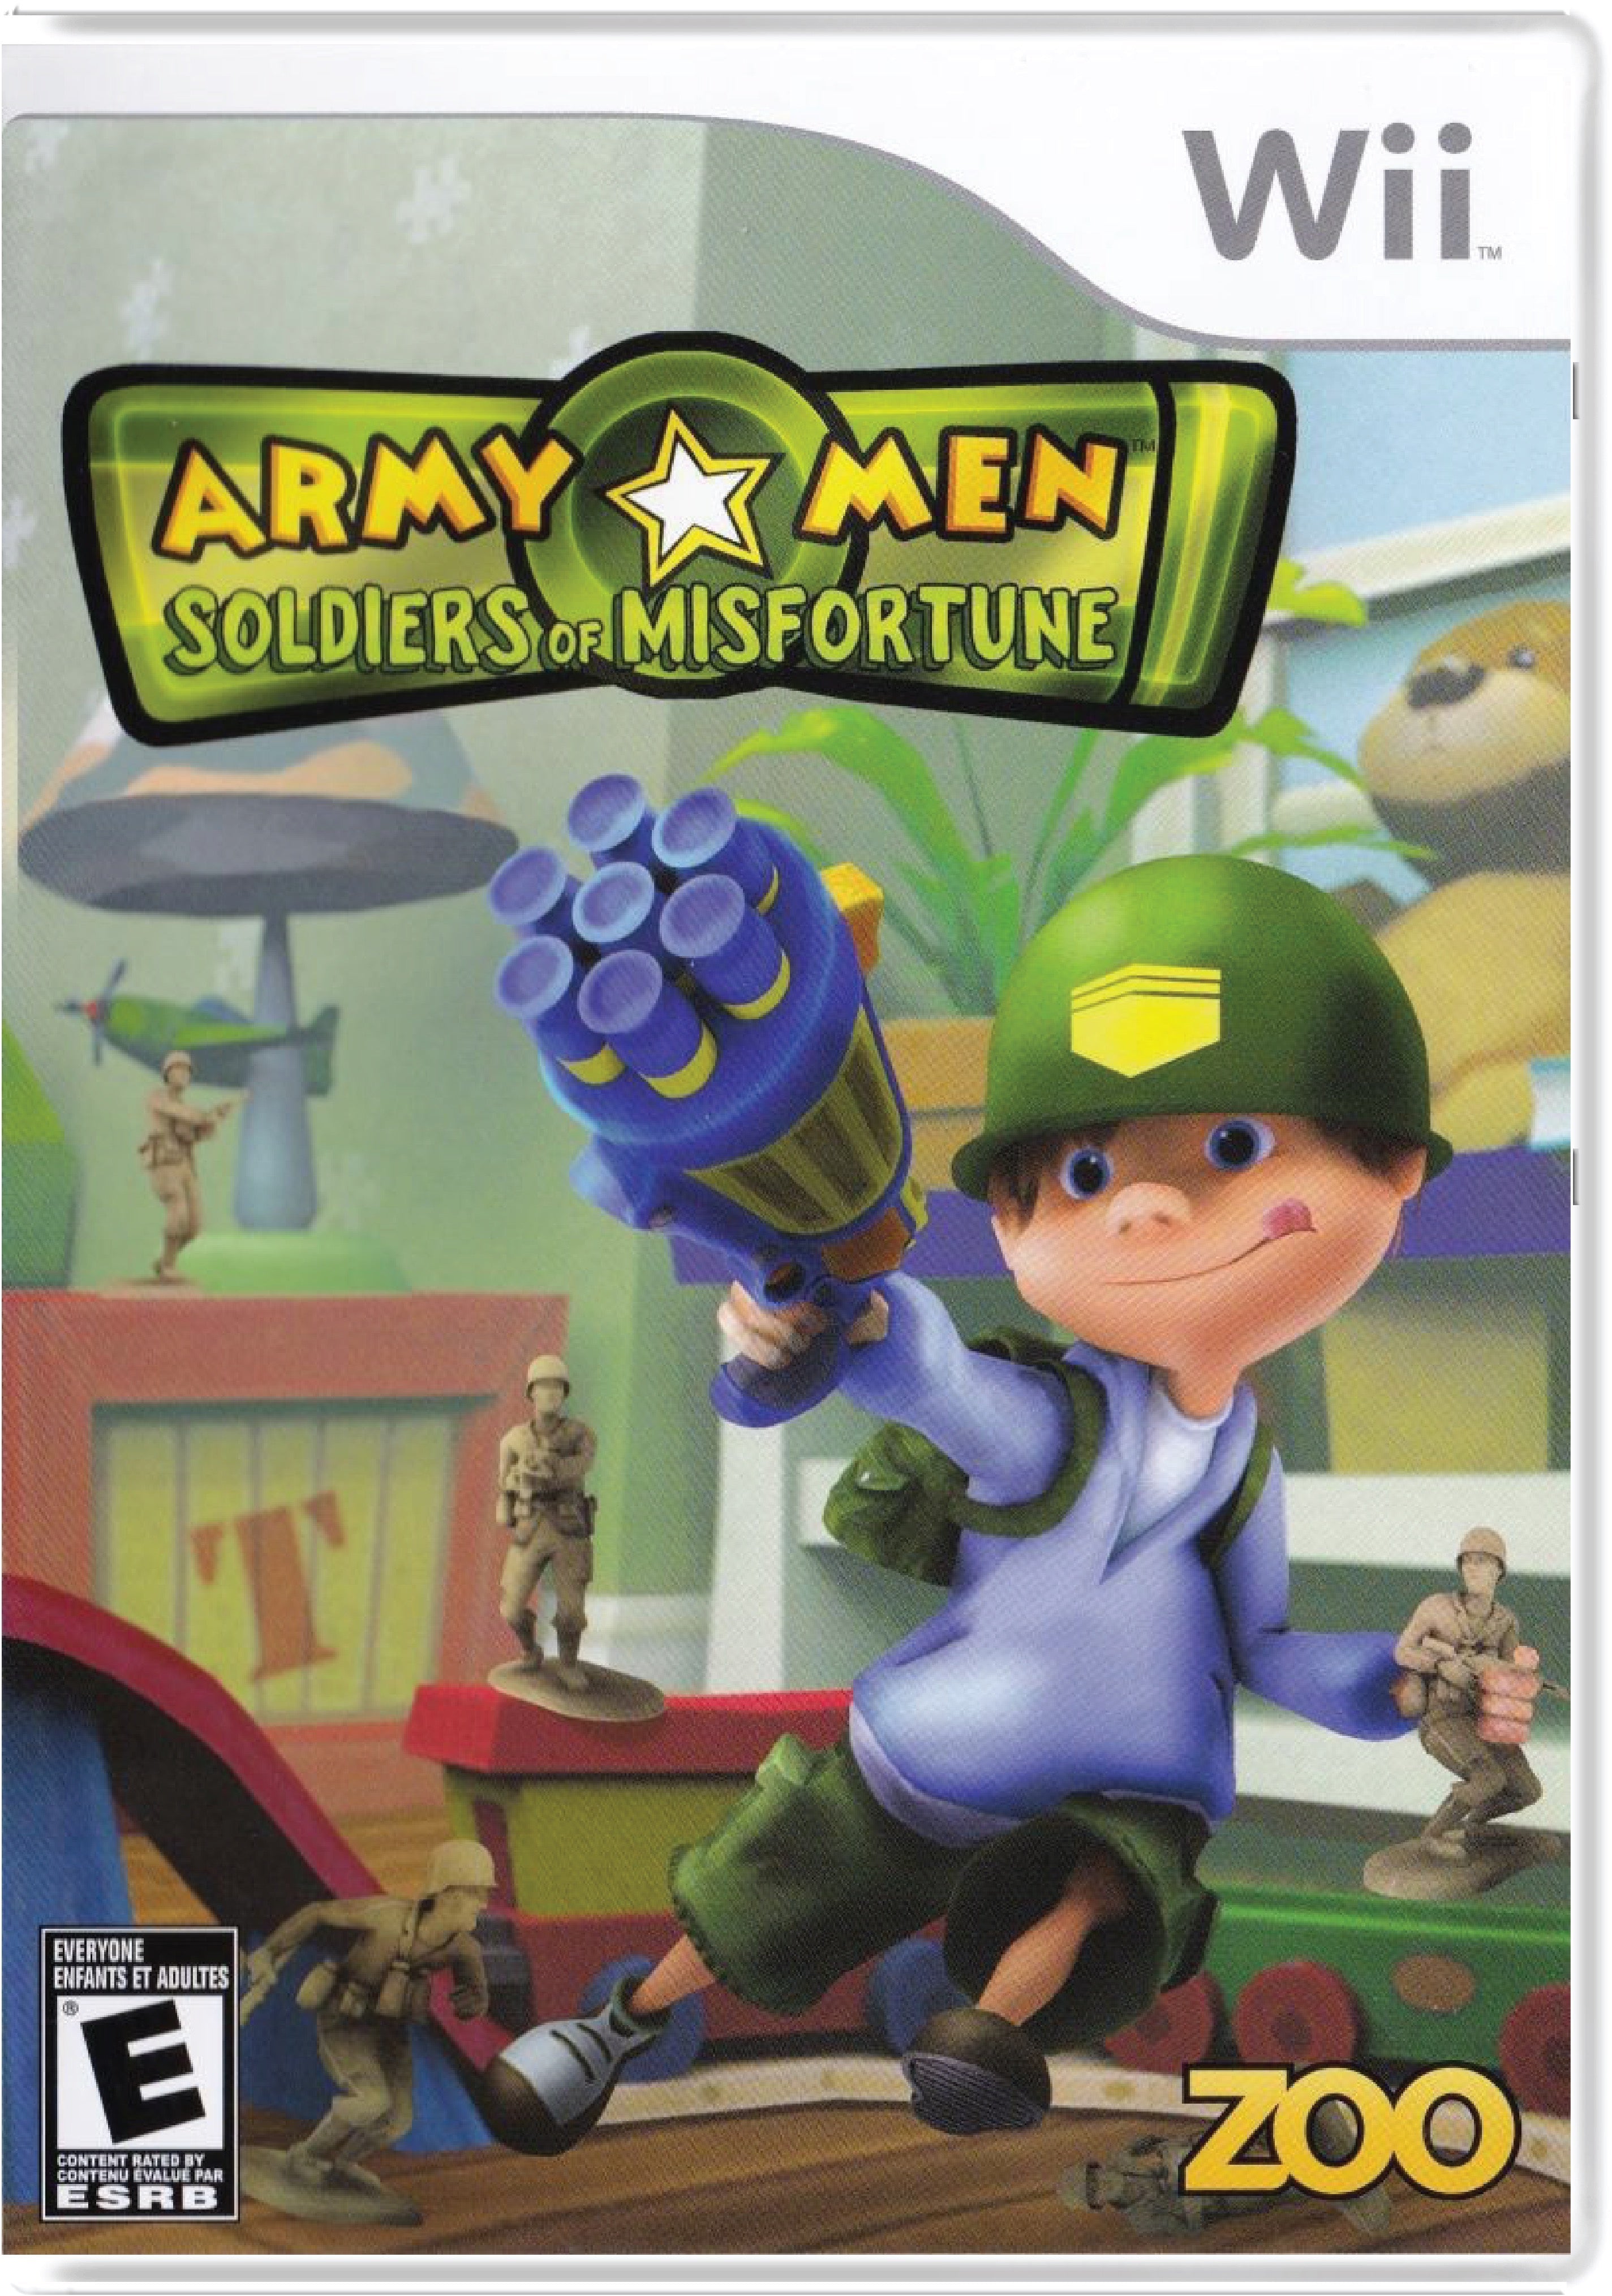 Army Men Soldiers of Misfortune Cover Art